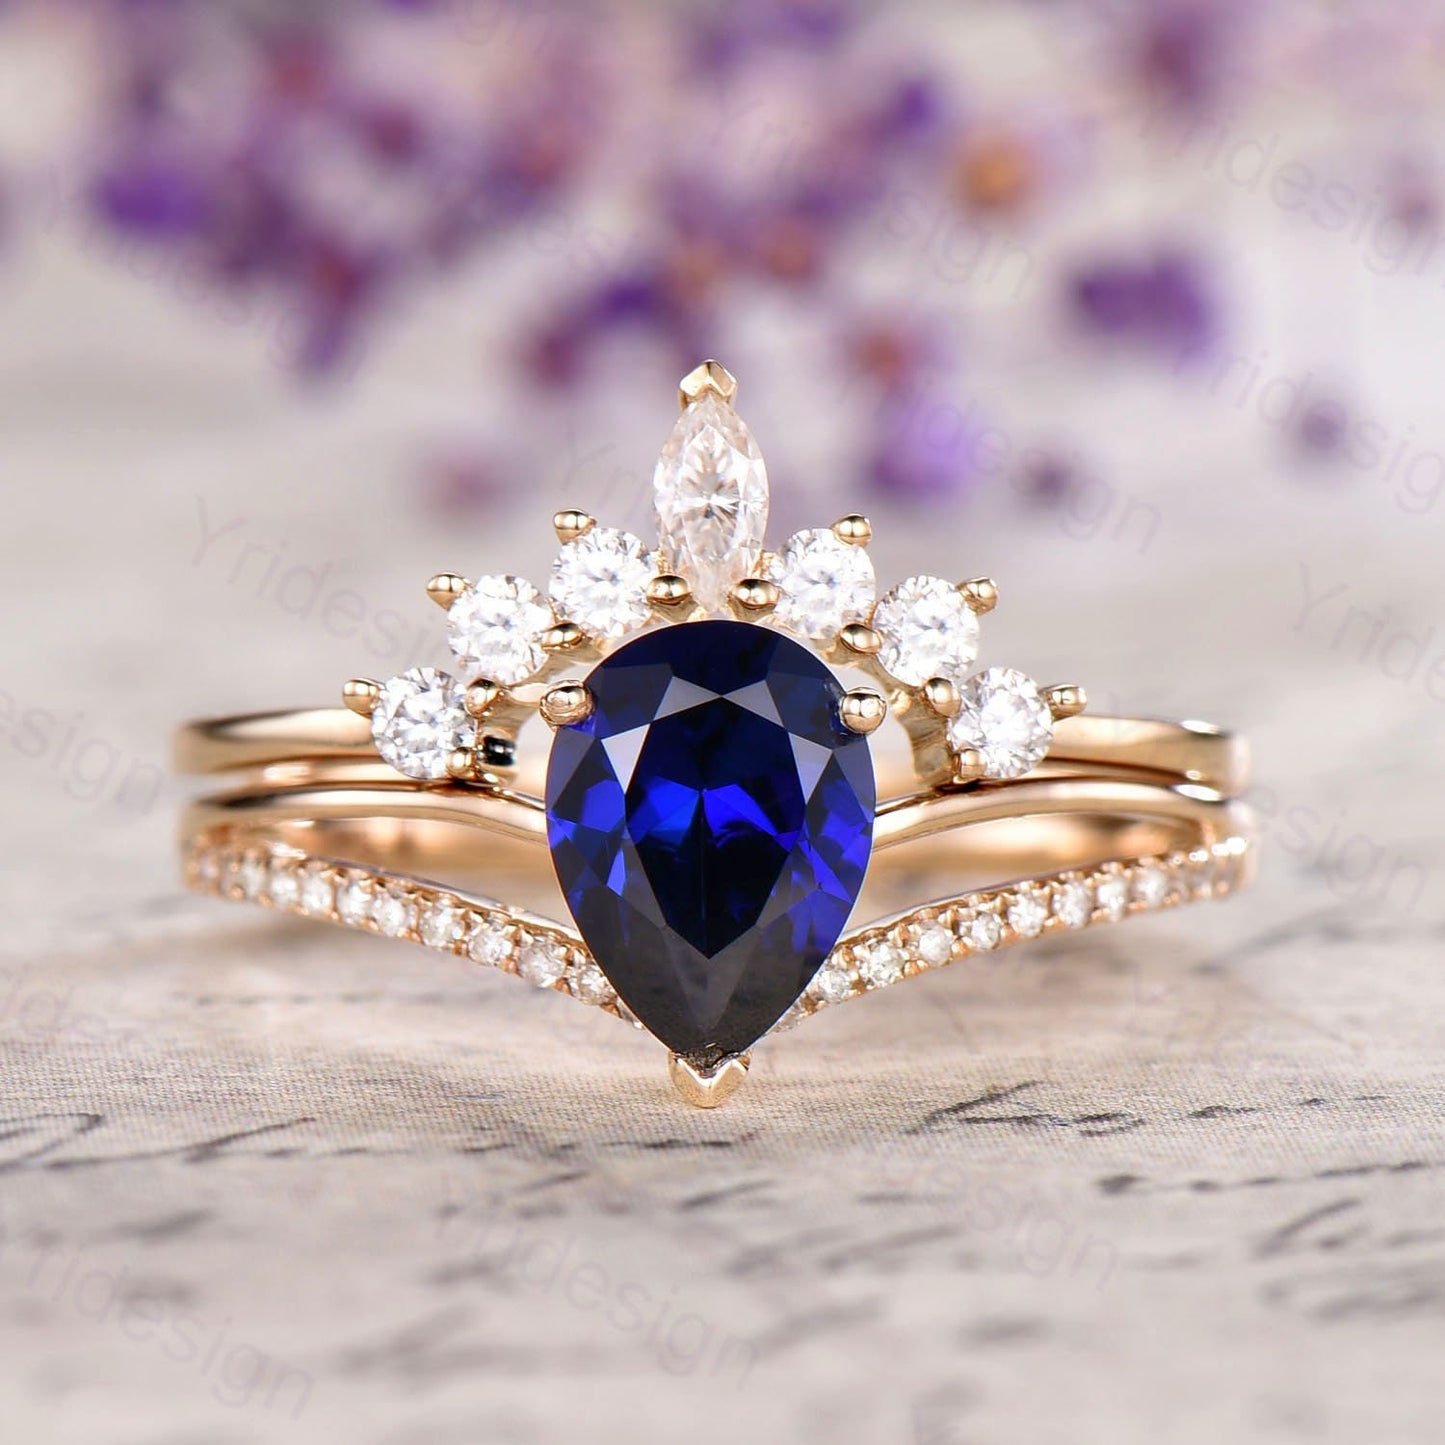 Vintage Sapphire Wedding Set Pear Shaped Sapphire Engagement Ring crown moissanite wedding band antique classic anniversary promise ring - PENFINE